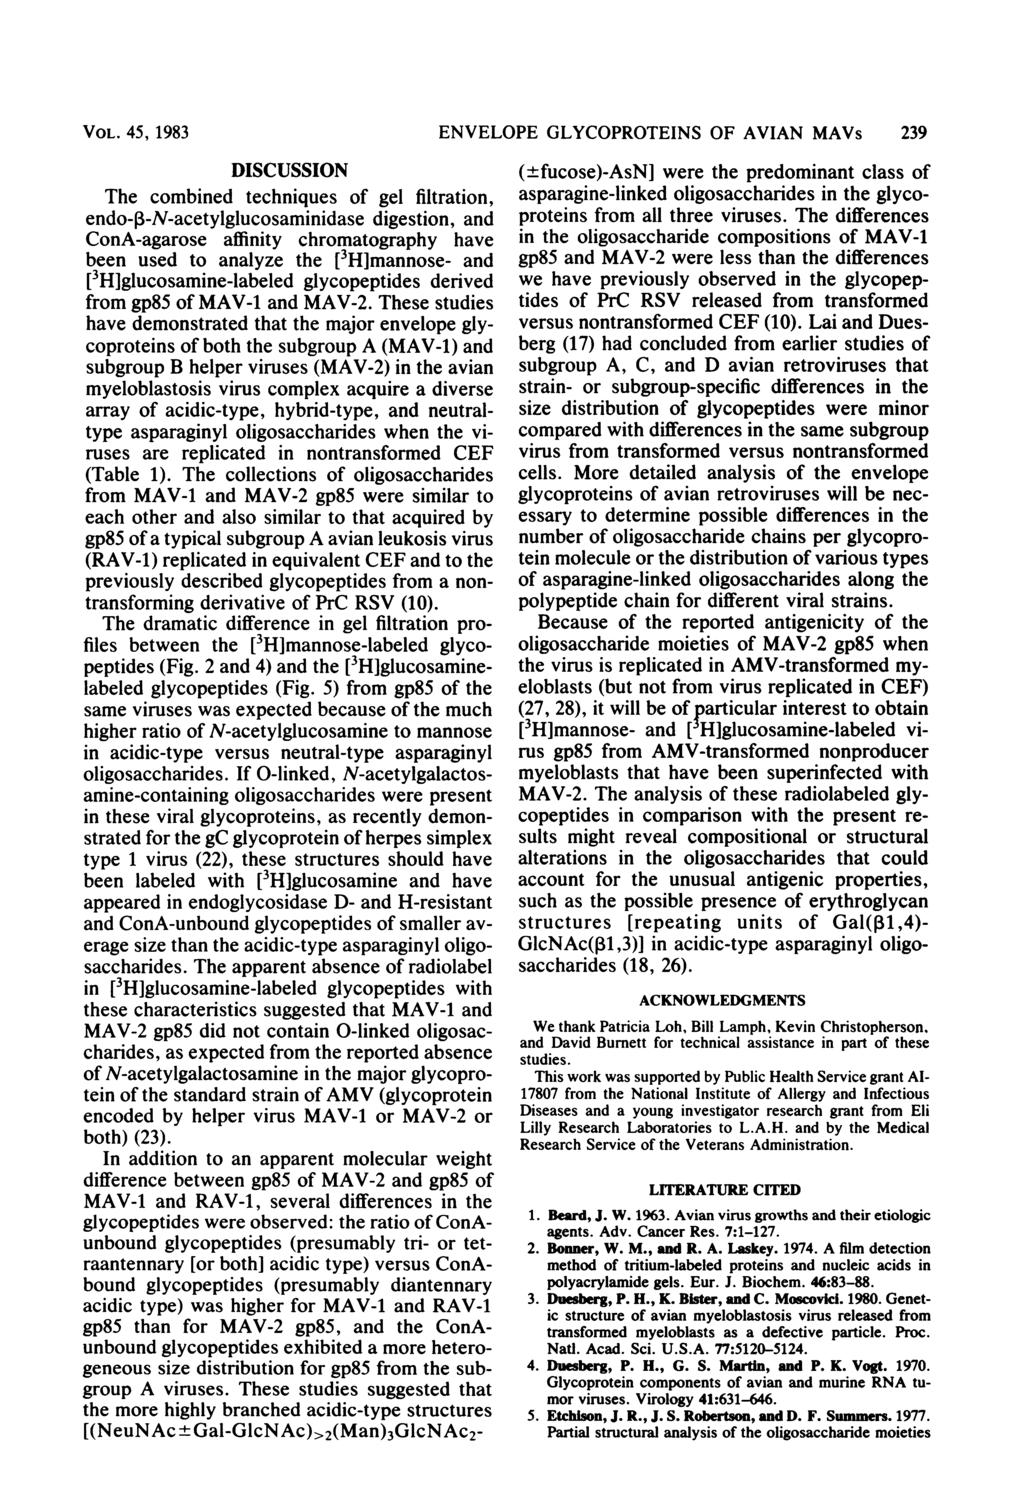 VOL. 45, 1983 DISCUSSION The combined techniques of gel filtration, endo-,-n-acetylglucosaminidase digestion, and ConA-agarose affinity chromatography have been used to analyze the [3H]mannose- and